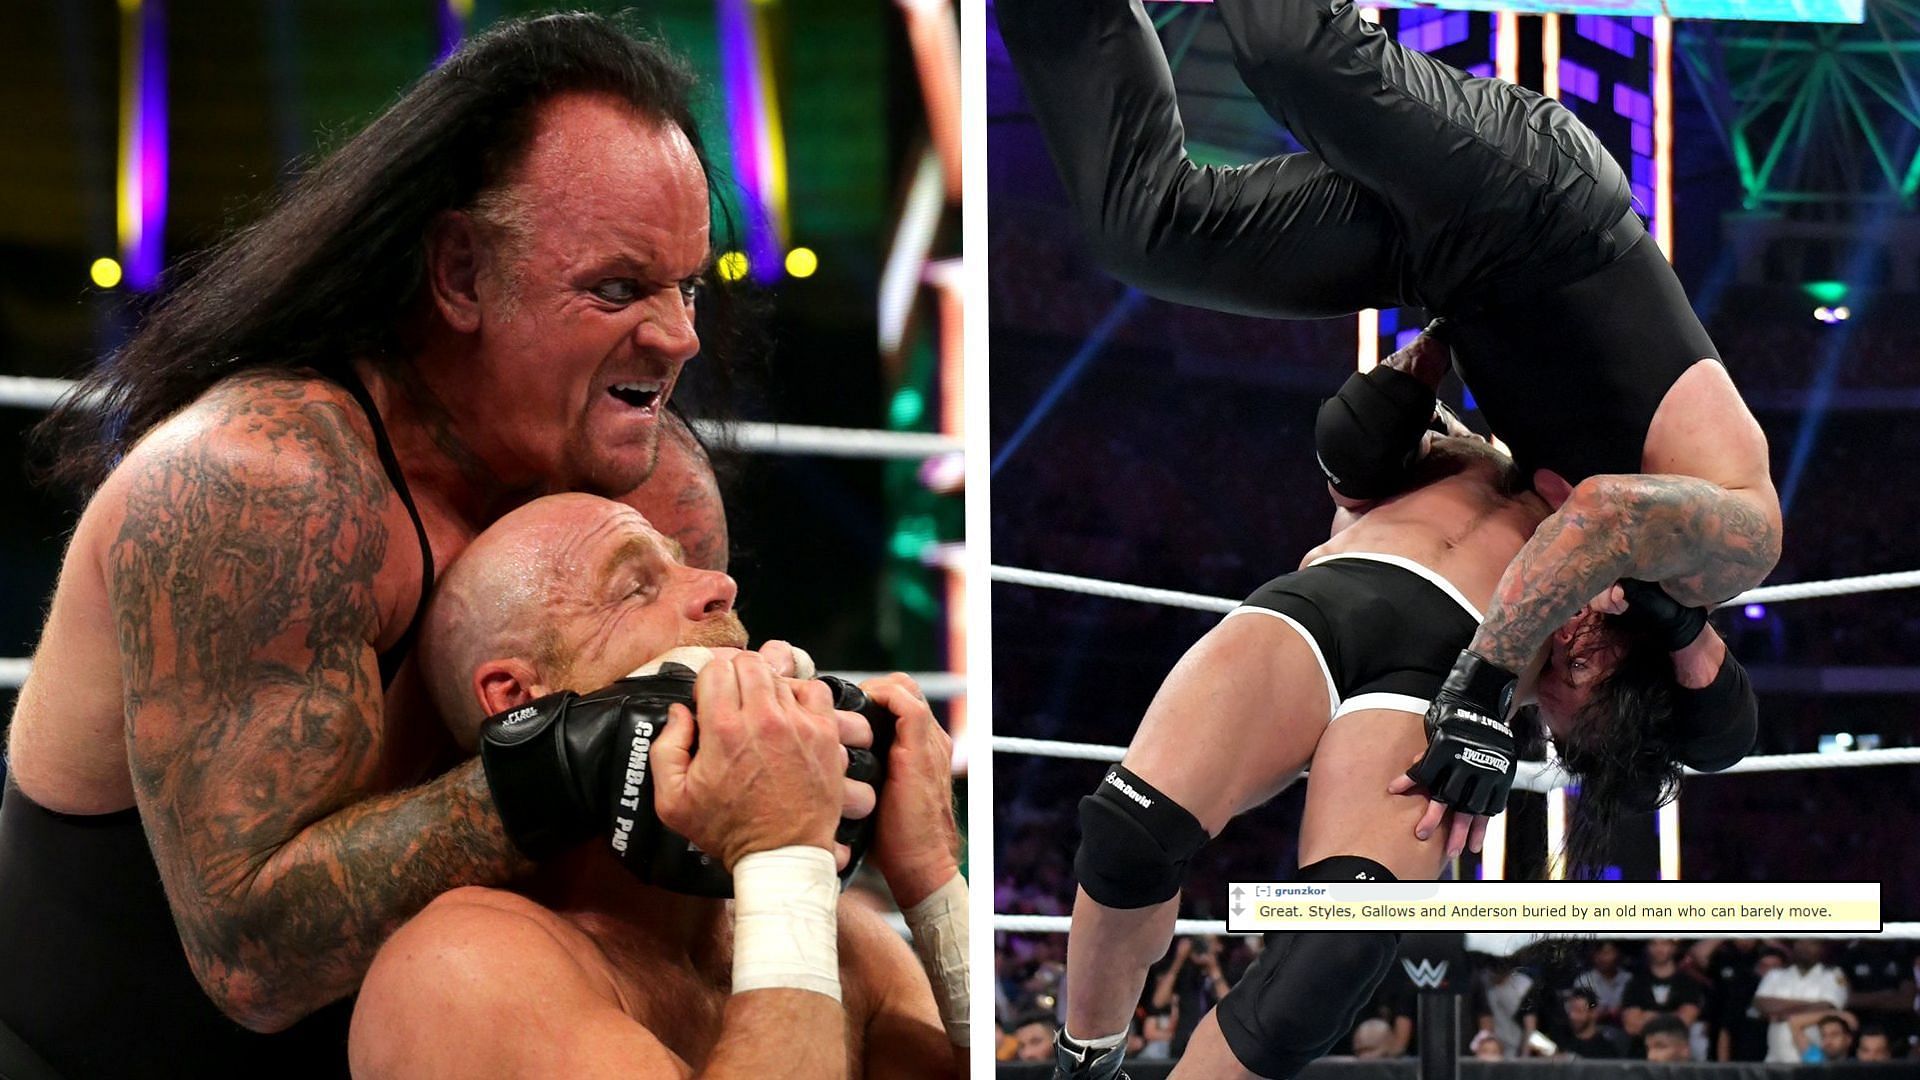 Some Reddit users have been critical of WWE Hall of Famer The Undertaker